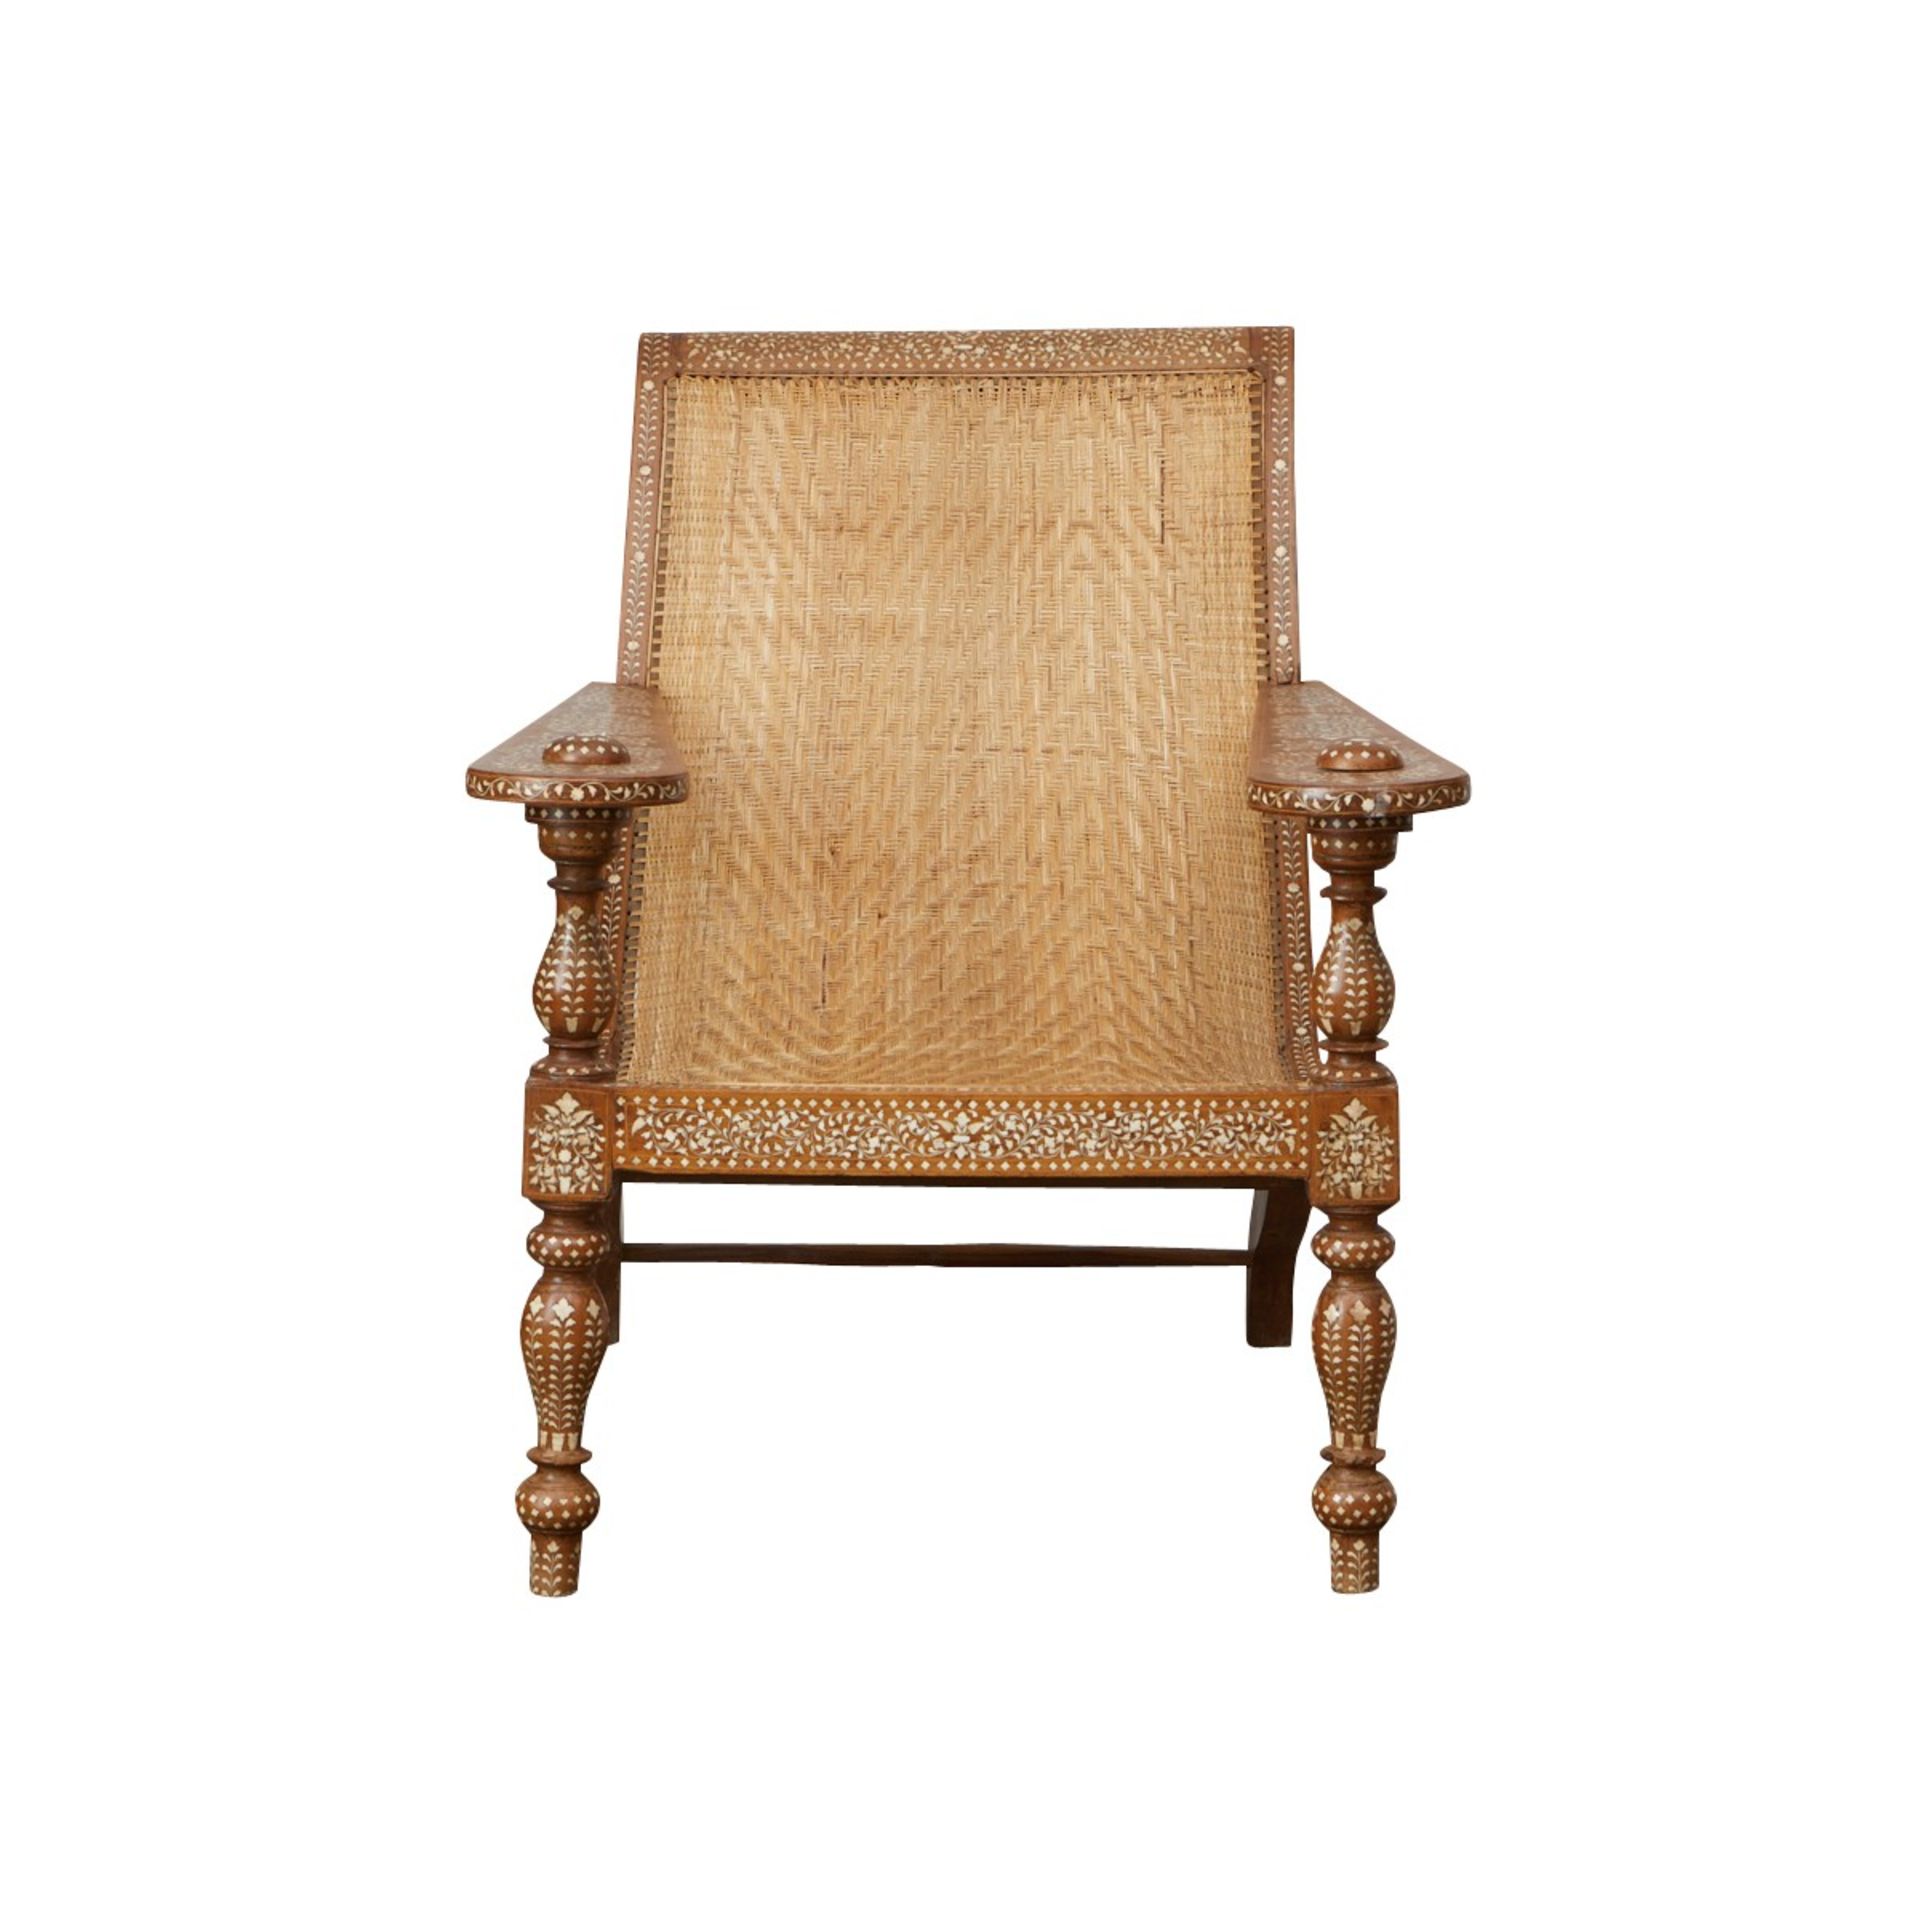 Syrian Inlaid Mother of Pearl Plantation Chair - Image 11 of 16